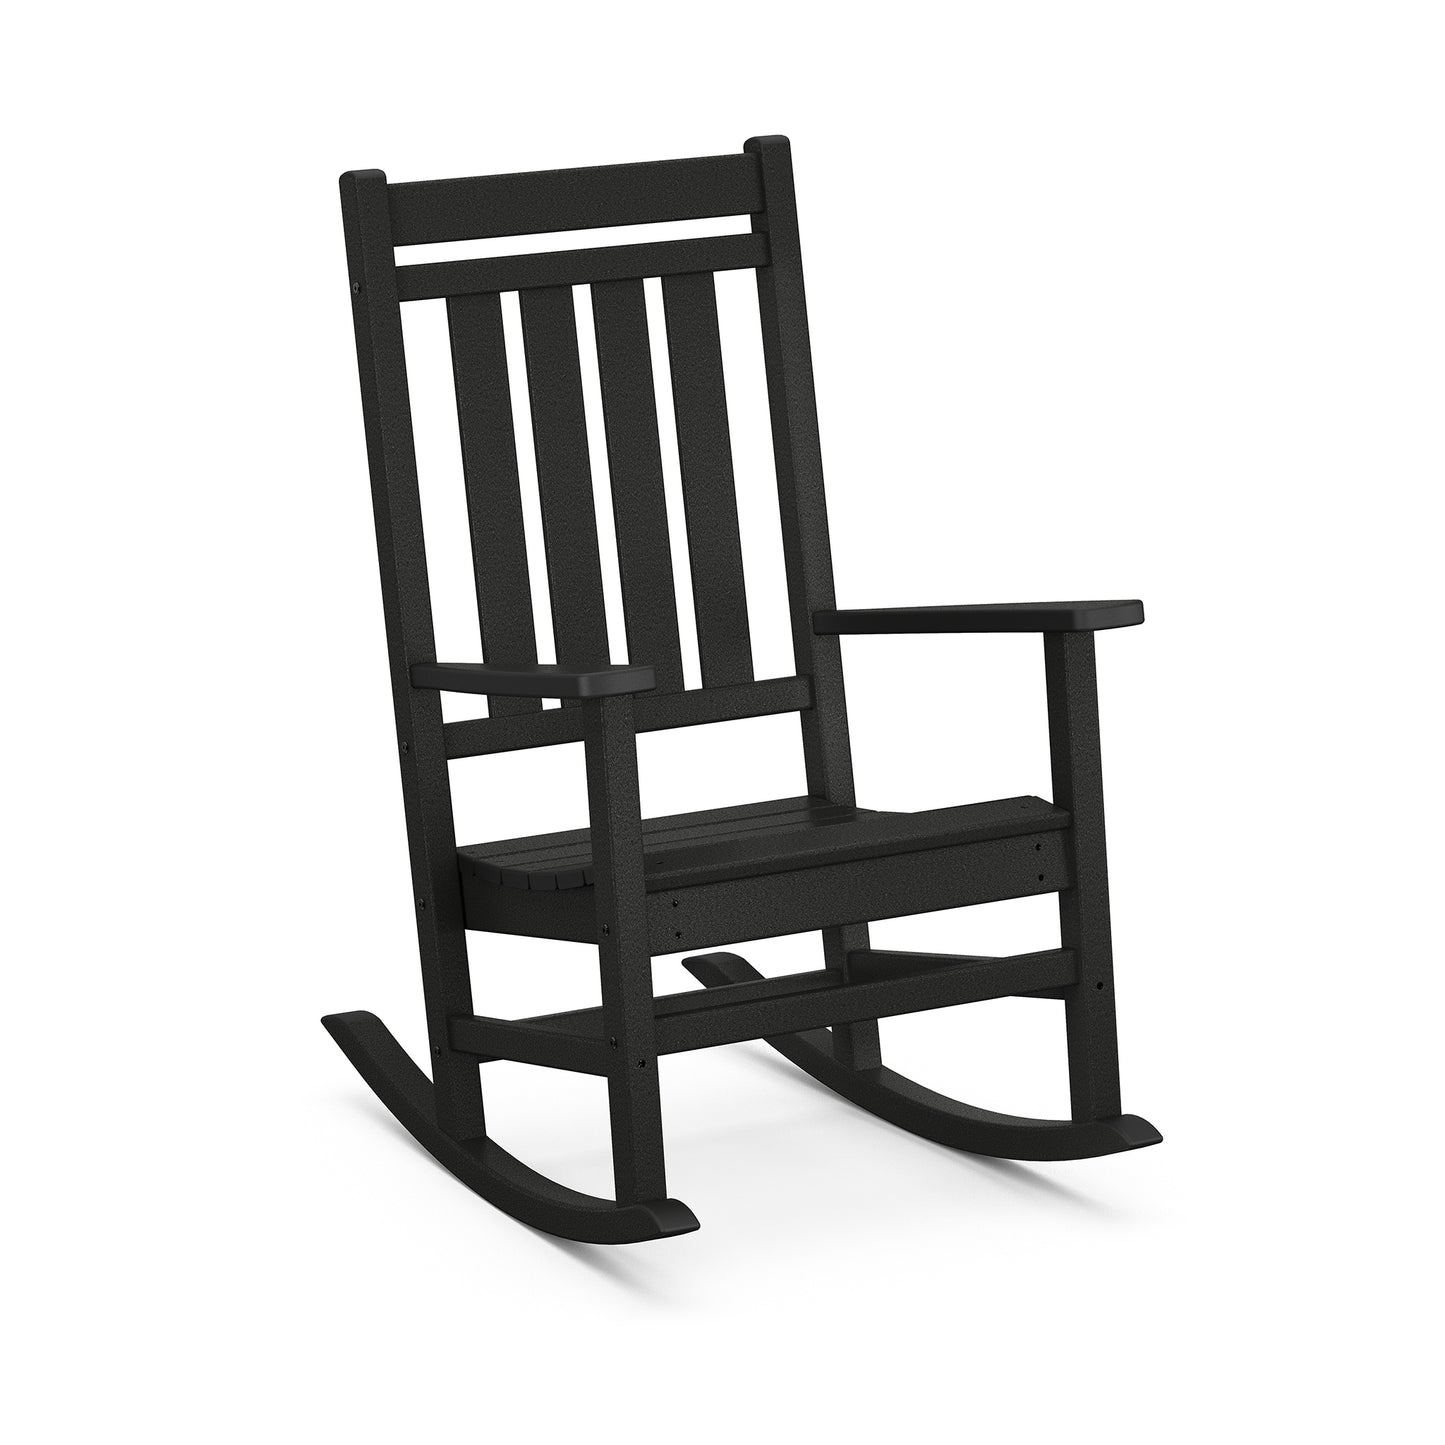 A POLYWOOD Estate Rocking Chair isolated on a white background, featuring a traditional design with vertical back slats and an ergonomic seat.